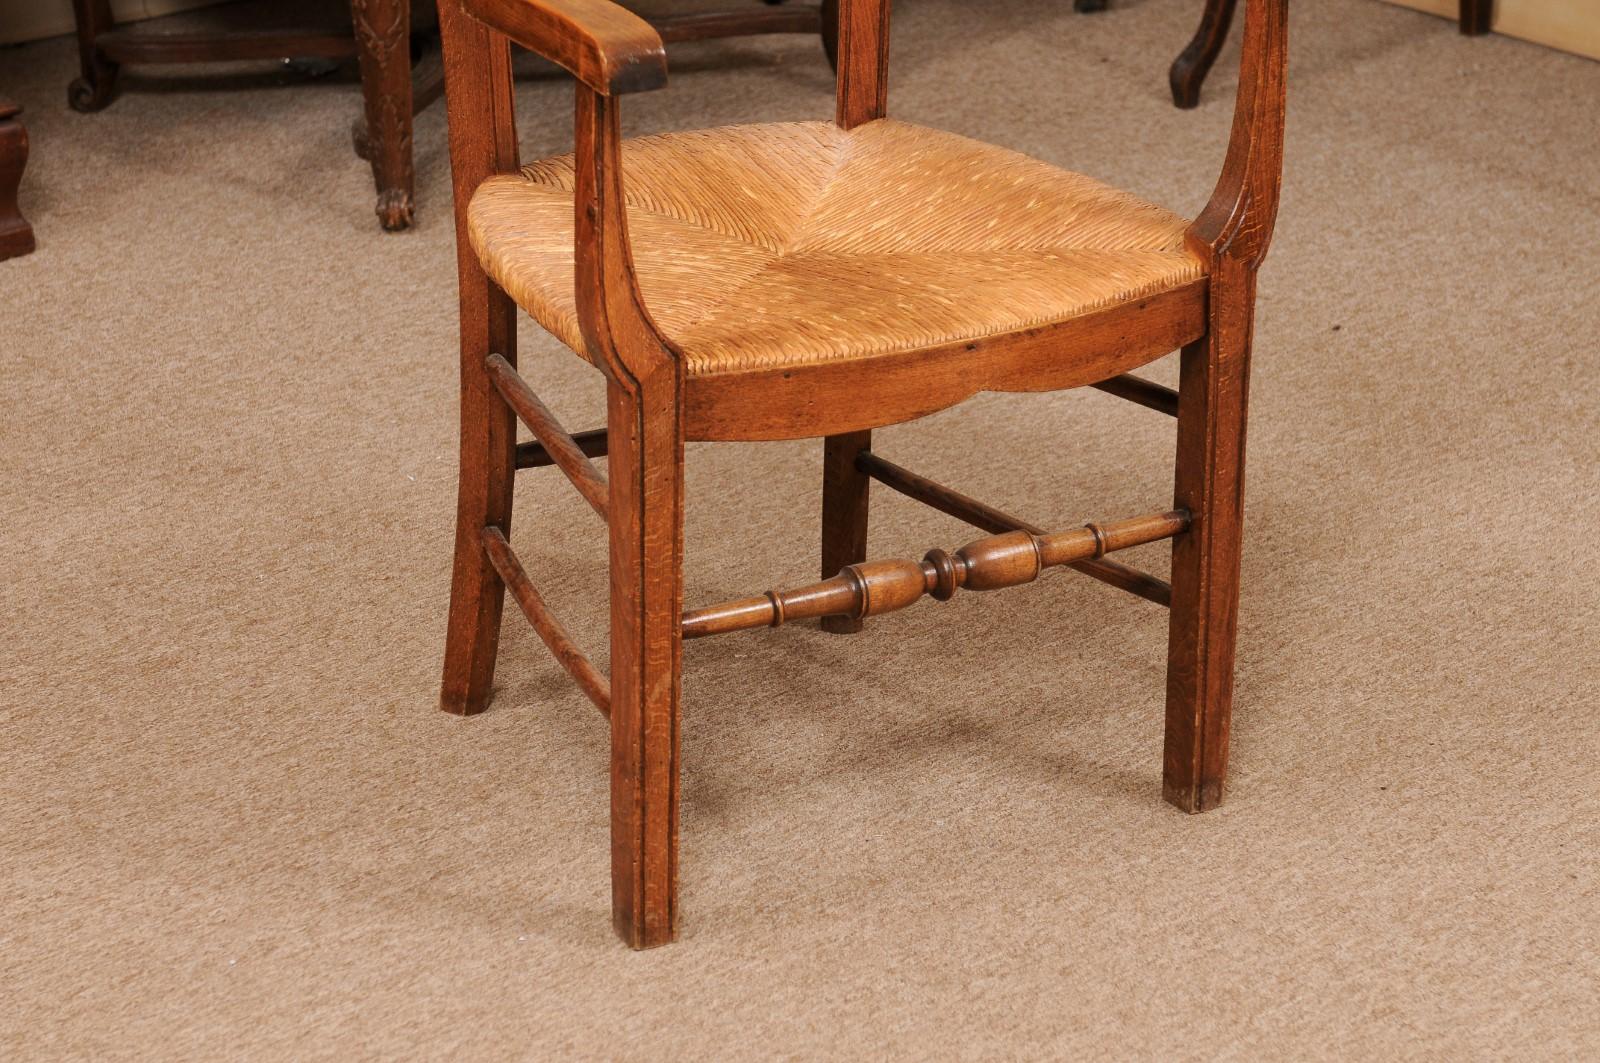 Fruitwood Rush Seat Armchair with Flower Basket Backsplat, Italy ca. 1850 For Sale 5